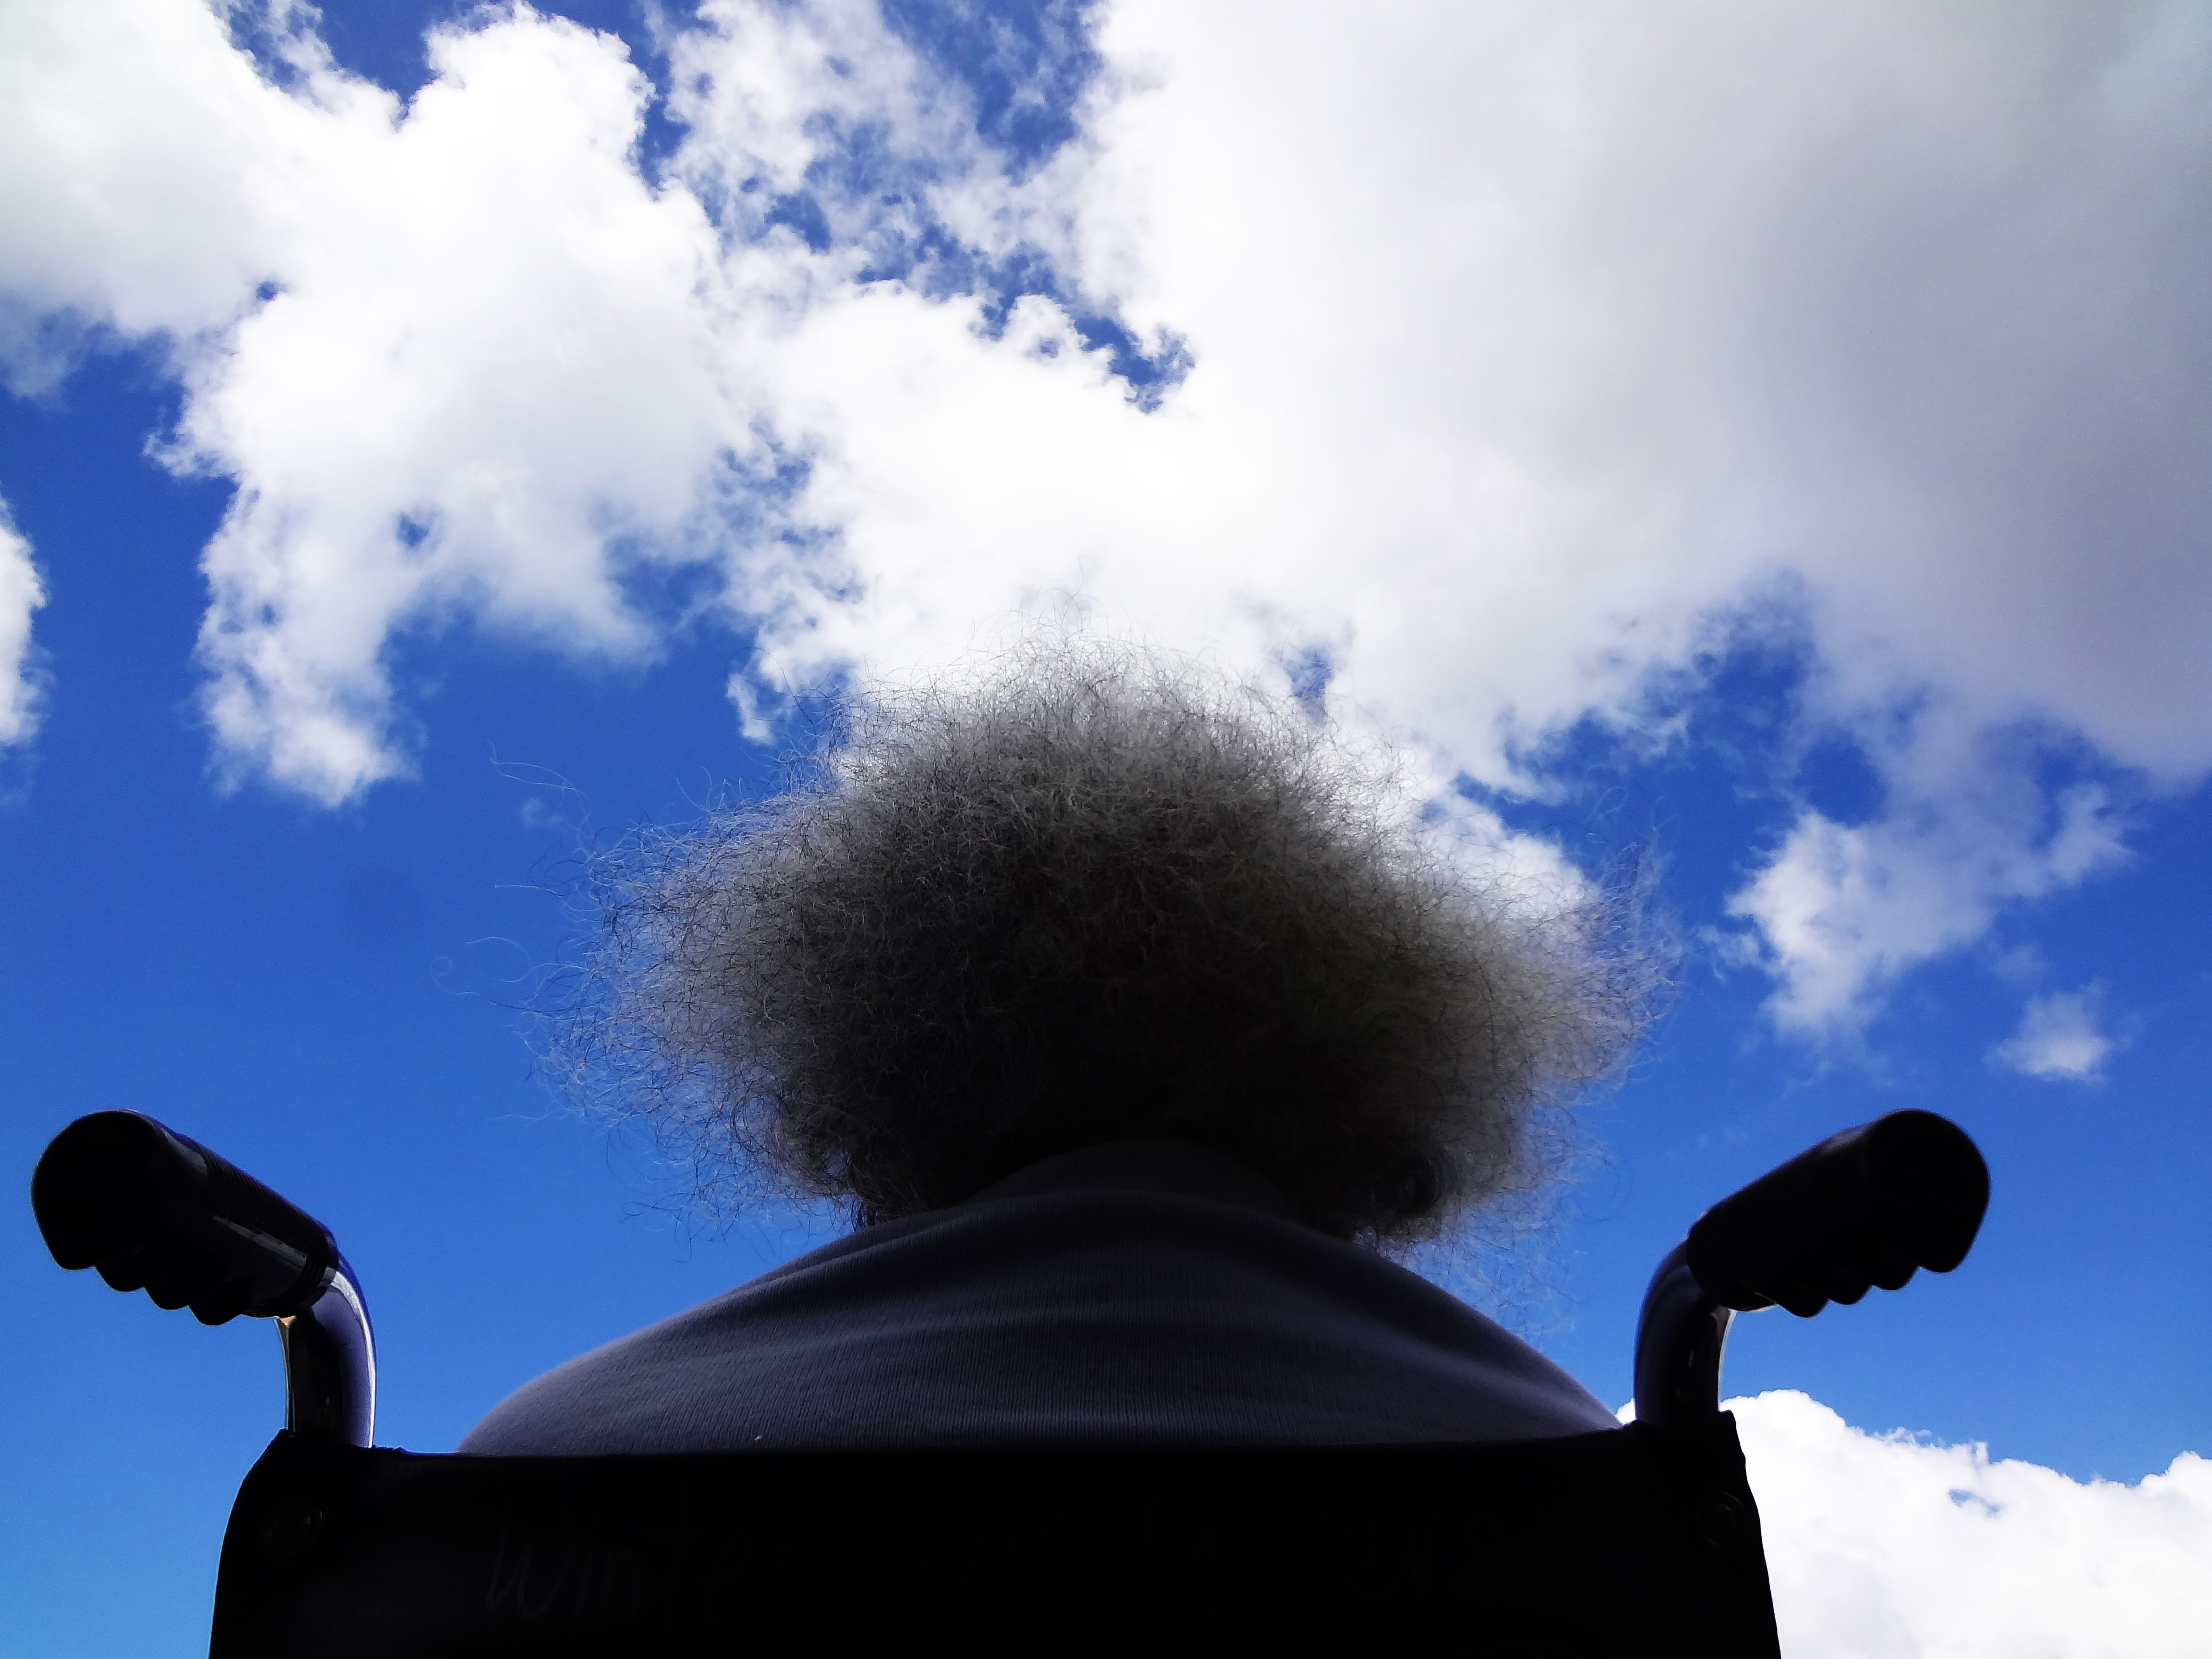 Rear view of woman in wheelchair looking at blue sky with clouds; image by James Williams, via Unsplash.com.